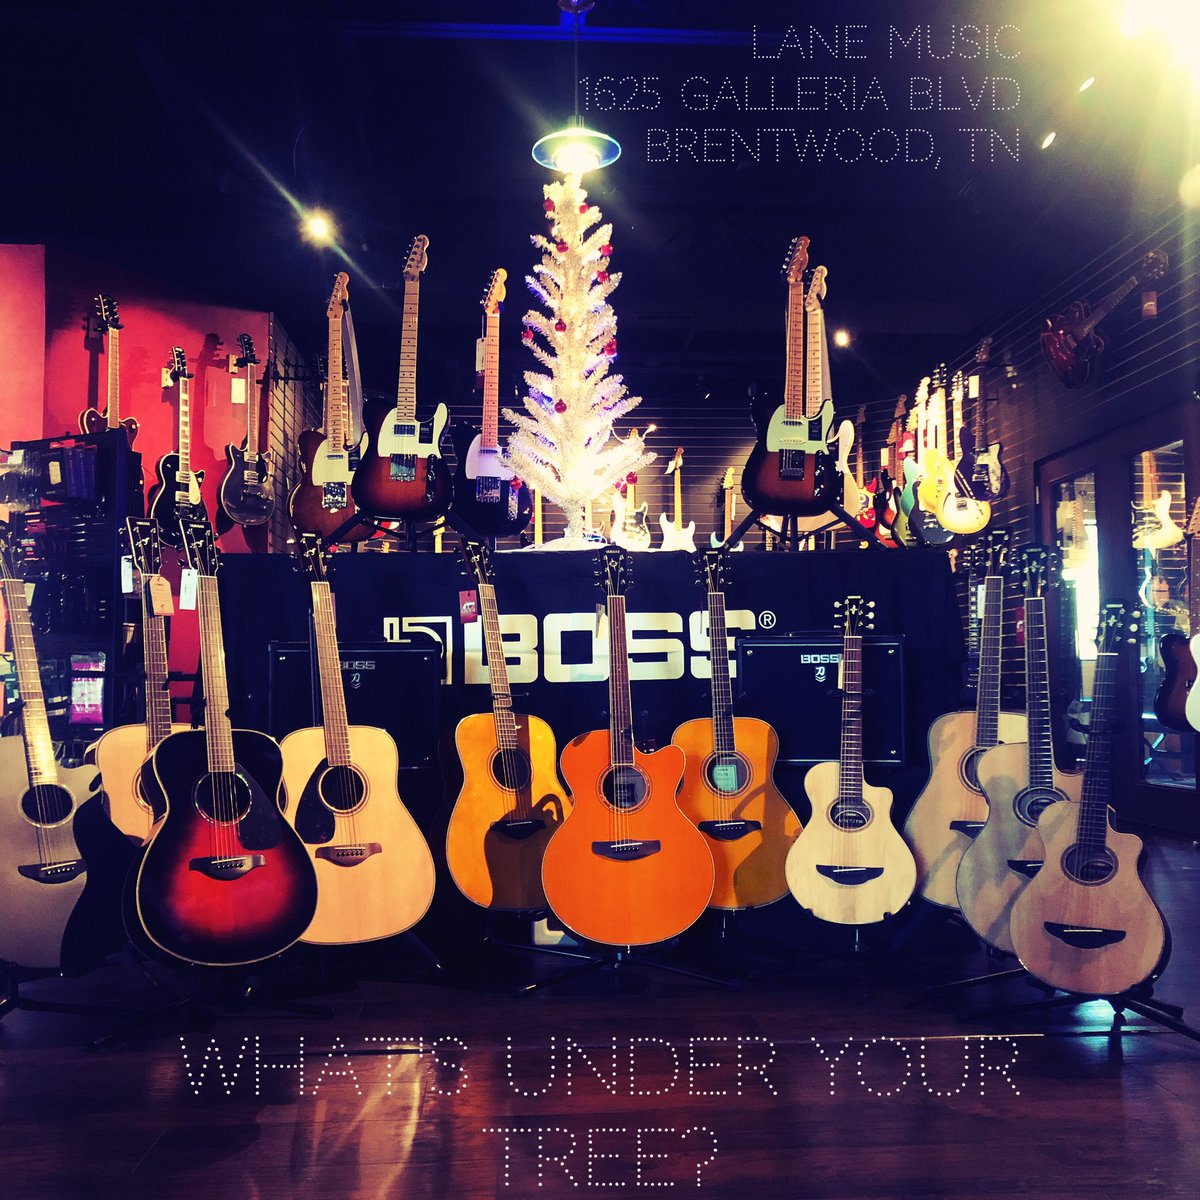 What’s under your tree?  Come grab everything you need at Lane Music!

#guitar #christmas #Hanukkah #holidays #bassguitar #acoustic #gifts #giftideas #give #love #peace #music #nashville #Tennessee #brentwood #williamsoncounty #america #celebrate